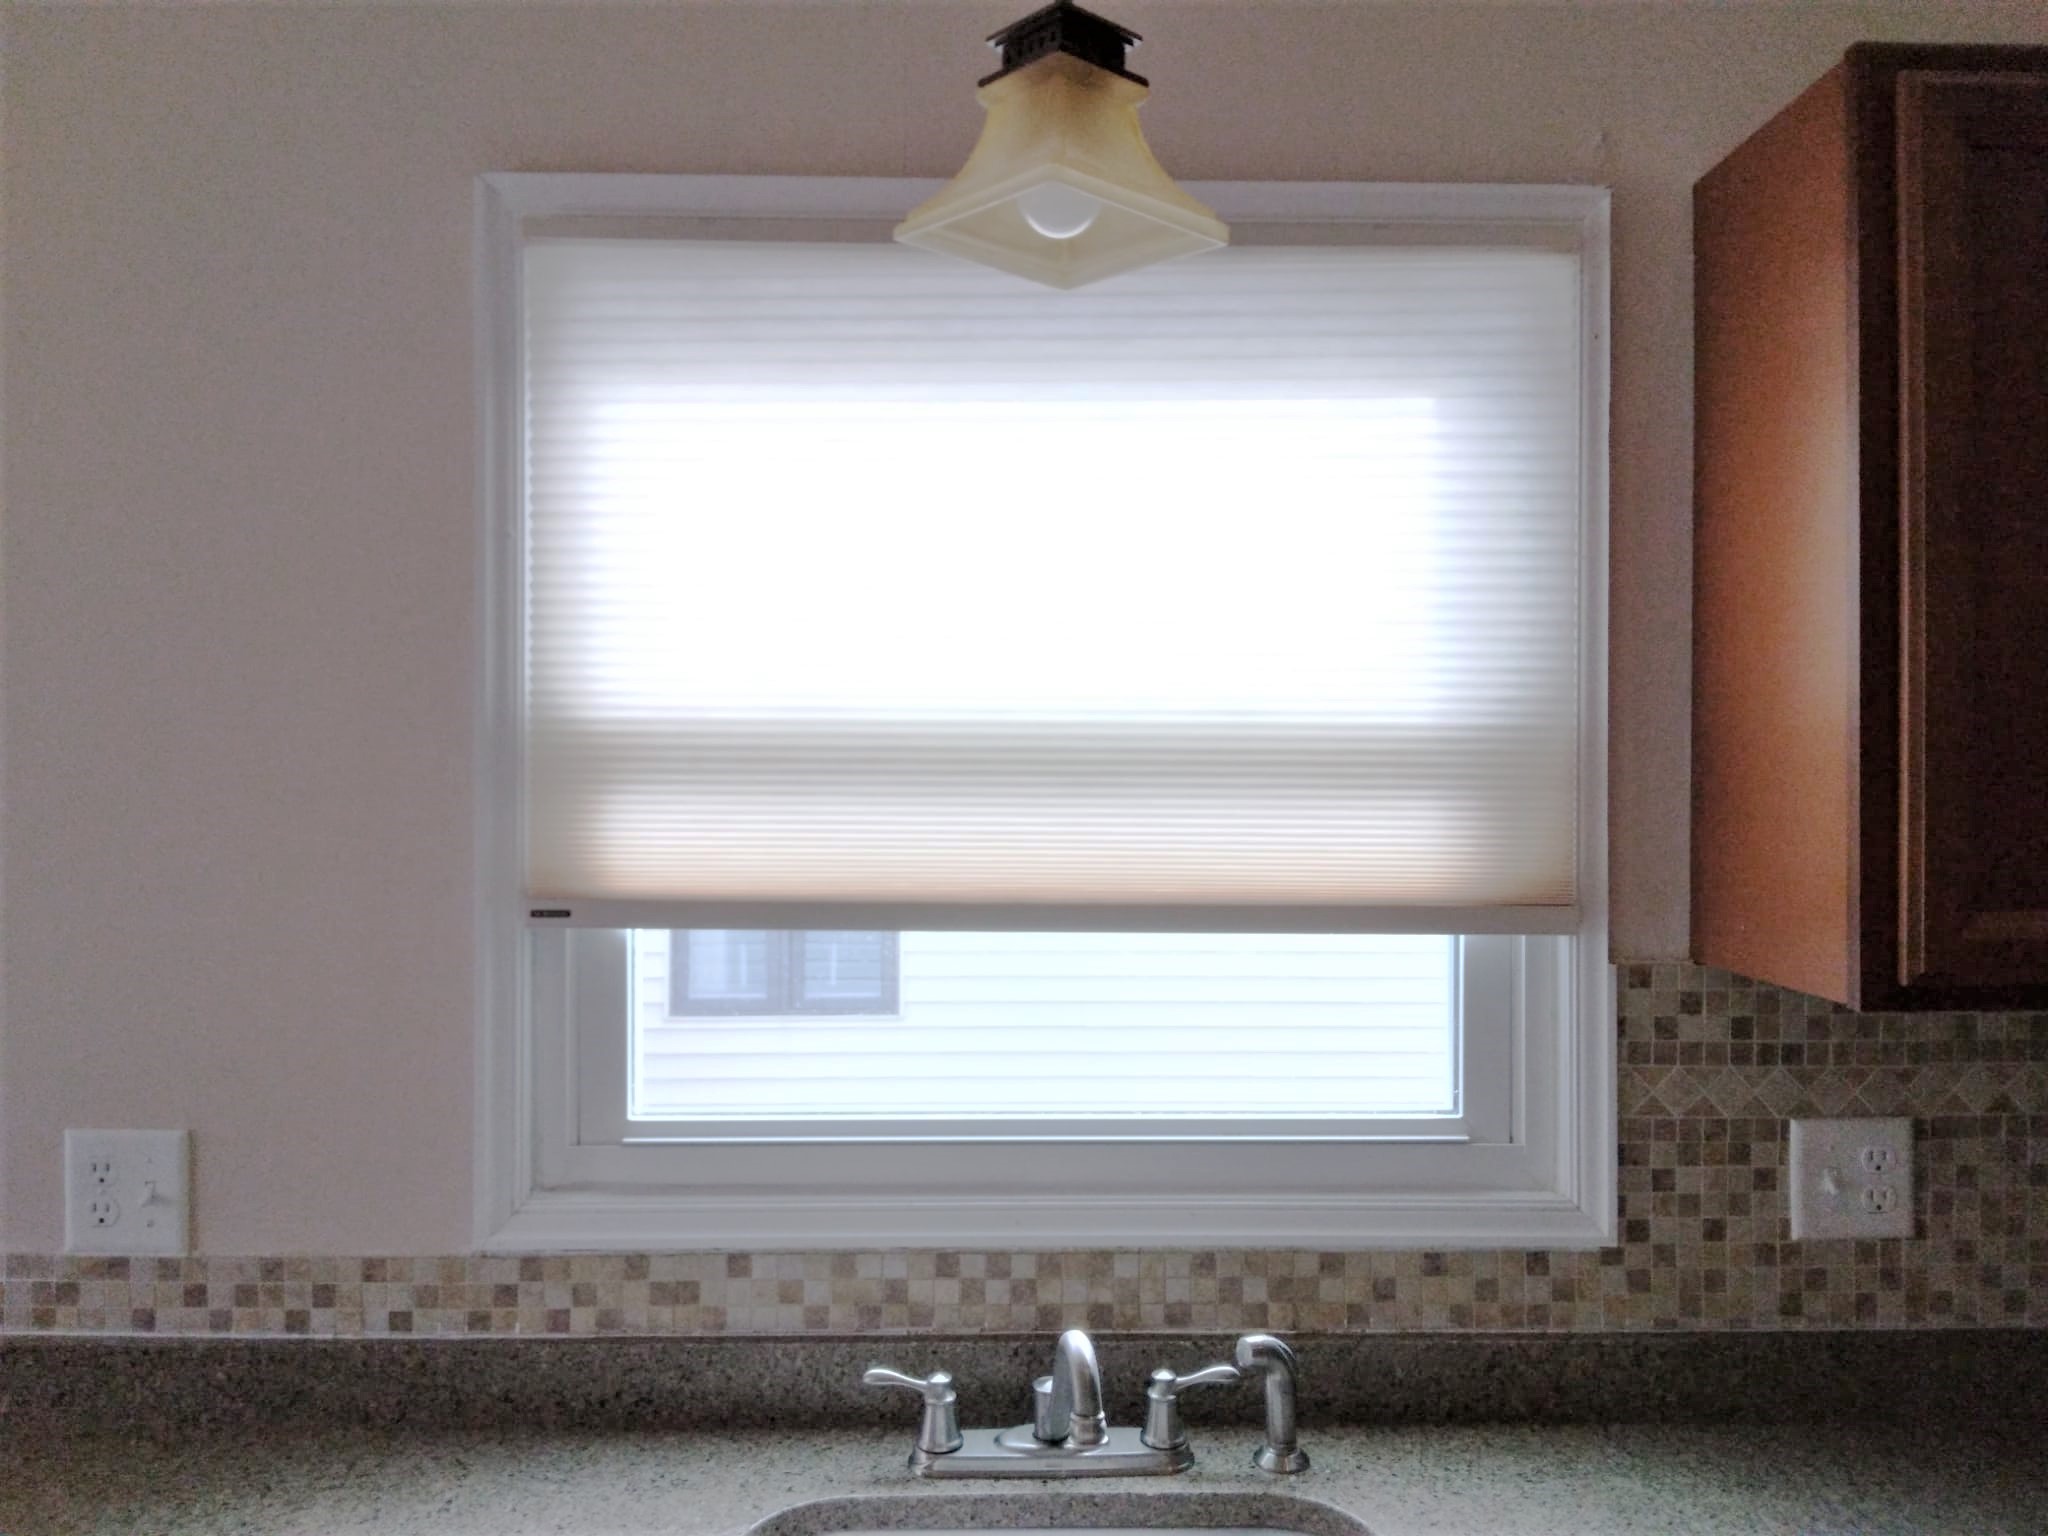 These Norman cellular shades are perfect for this Springfield Illinois kitchen. They are the perfect window covering for insulation and filtering the light coming through.   BudgetBlinds  Blinds  CellularShades  WindowCoverings  SpringfieldIllinois  Springfield